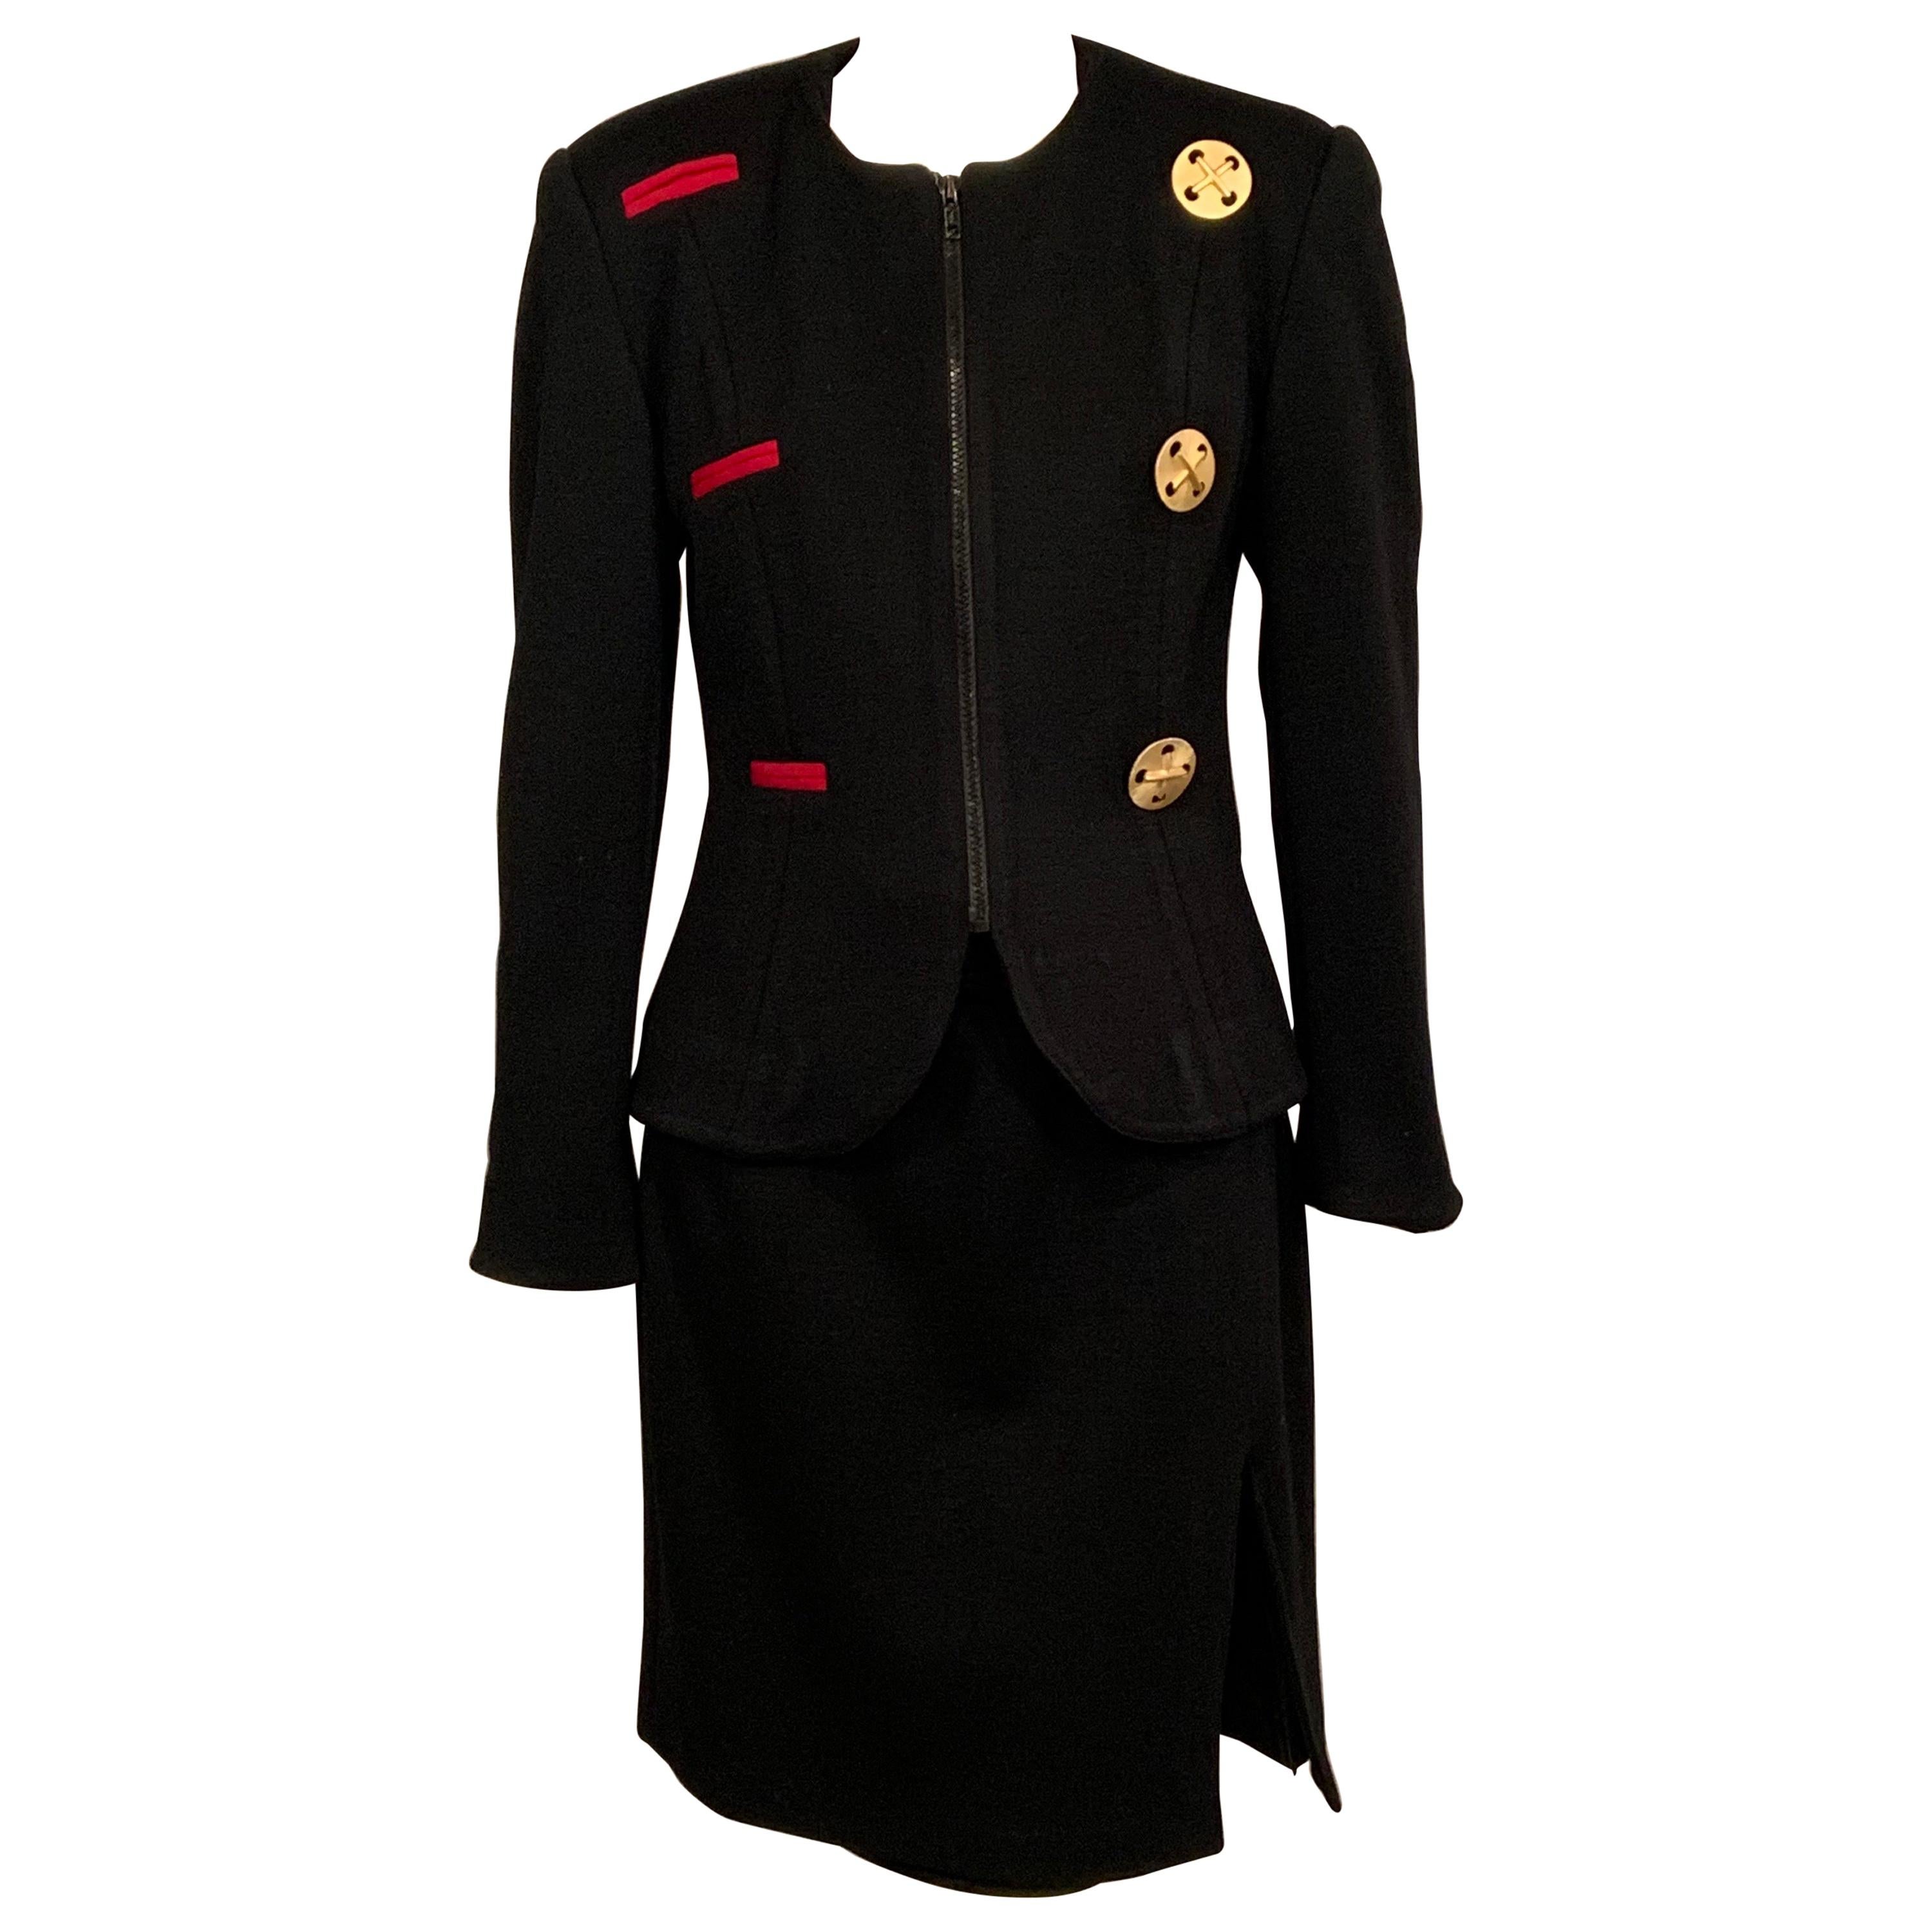 Toby Lerner Philadelphia Black Wool Suit with Decorative Buttons and Buttonholes For Sale